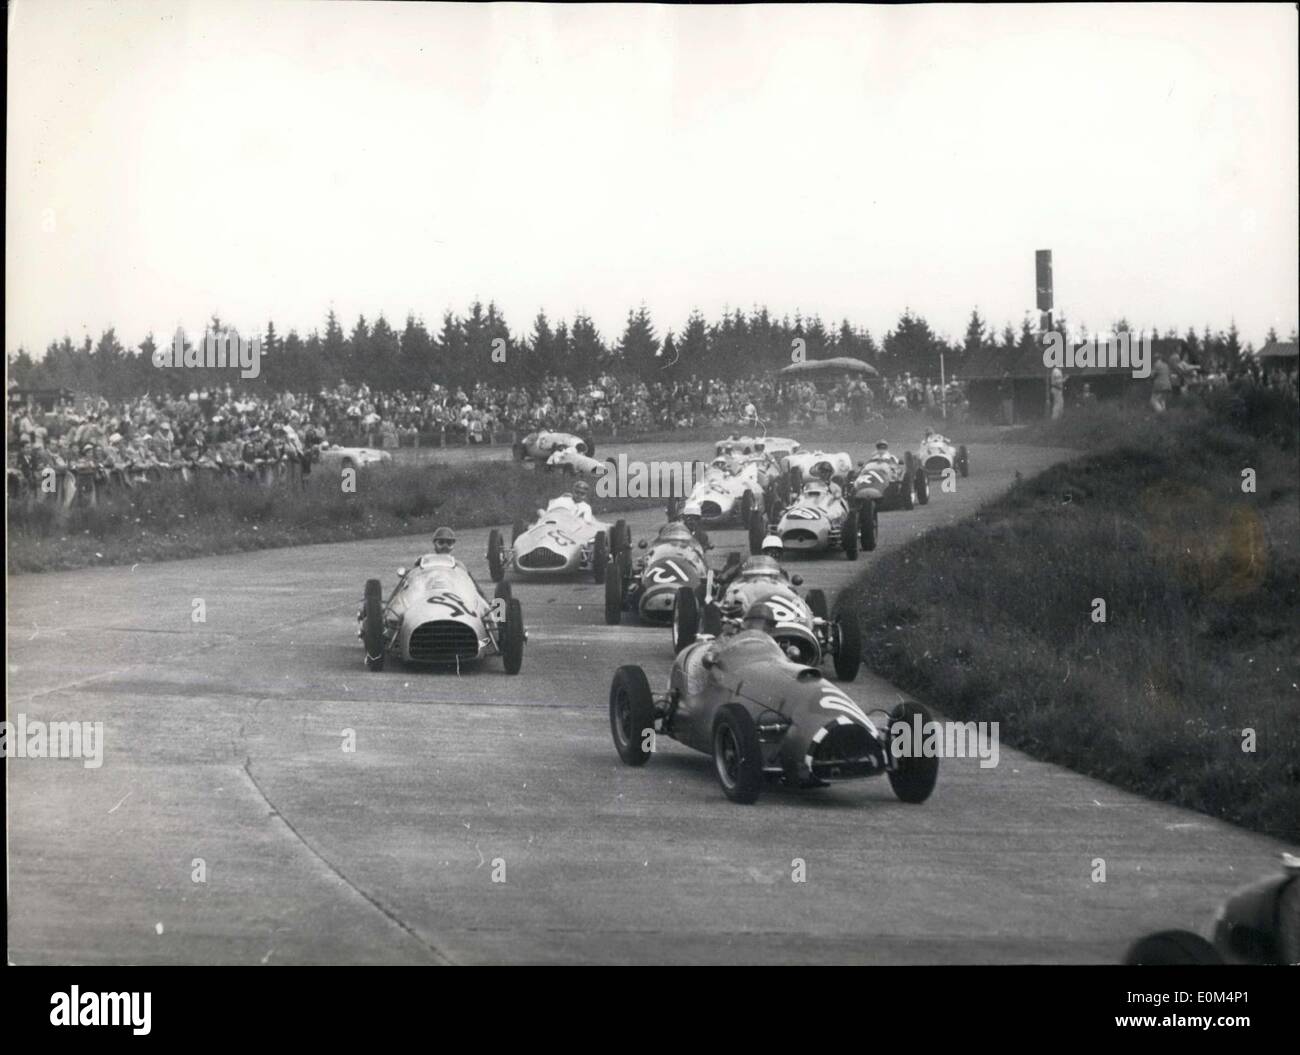 Aug. 02, 1953 - Pictured is a scene from a Formula II race at Nuerburgring in Germany. Italian Giuseppe Farina won in a Ferrari. Stock Photo